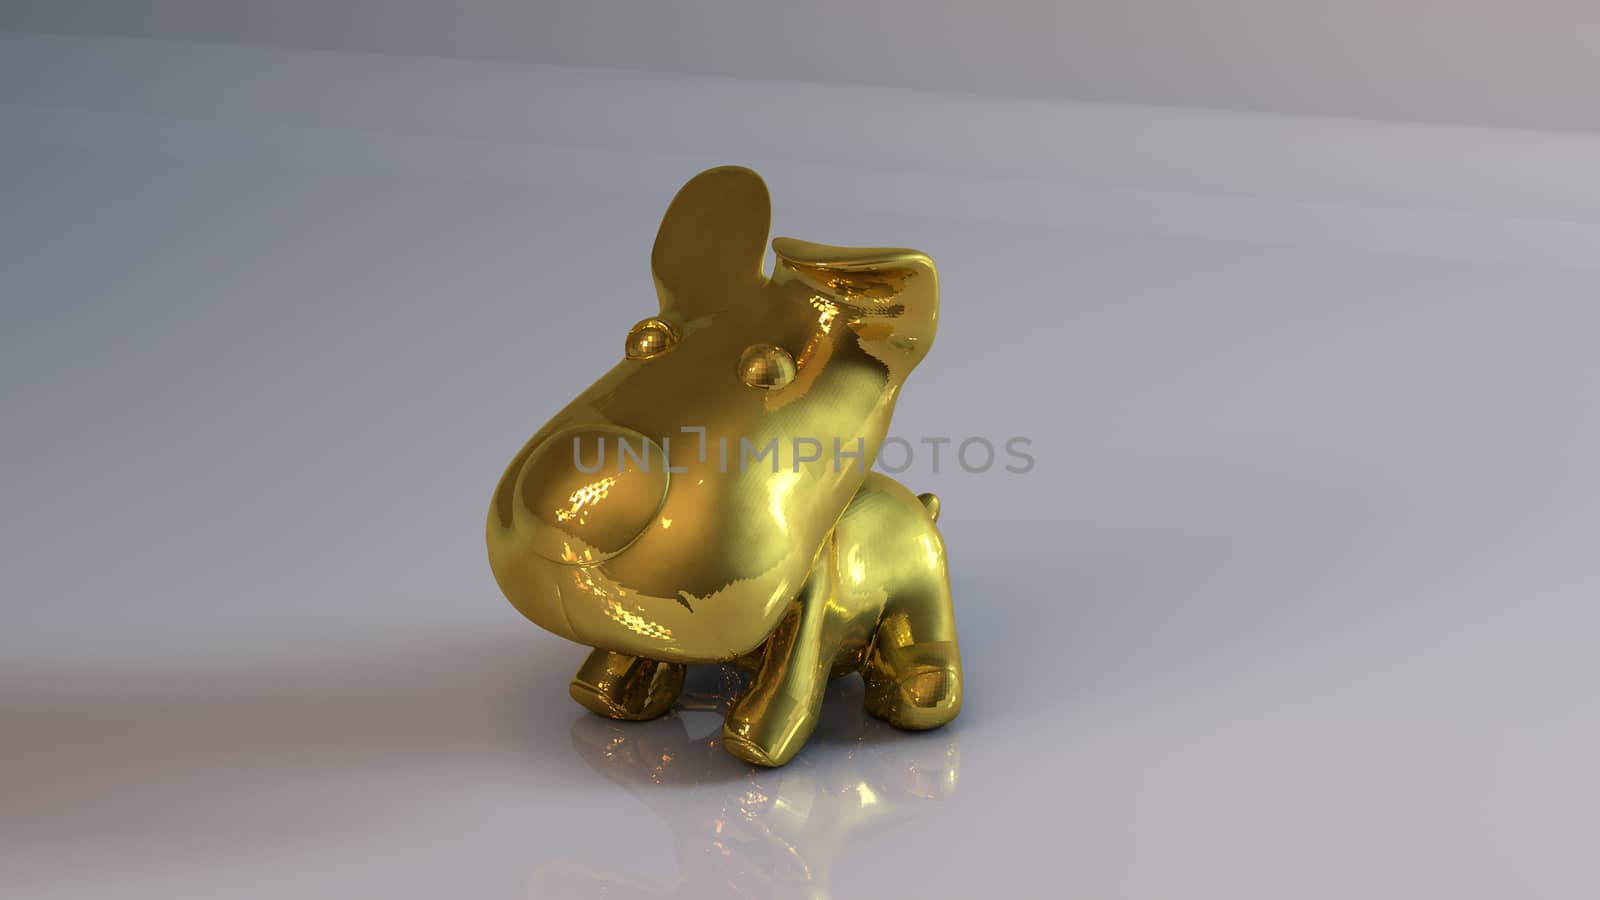 Golden 3D object (toy dog) inside a white reflected stage with high render quality to be used as a logo, medal, symbol, shape, emblem, icon, business, geometric, label or any other use